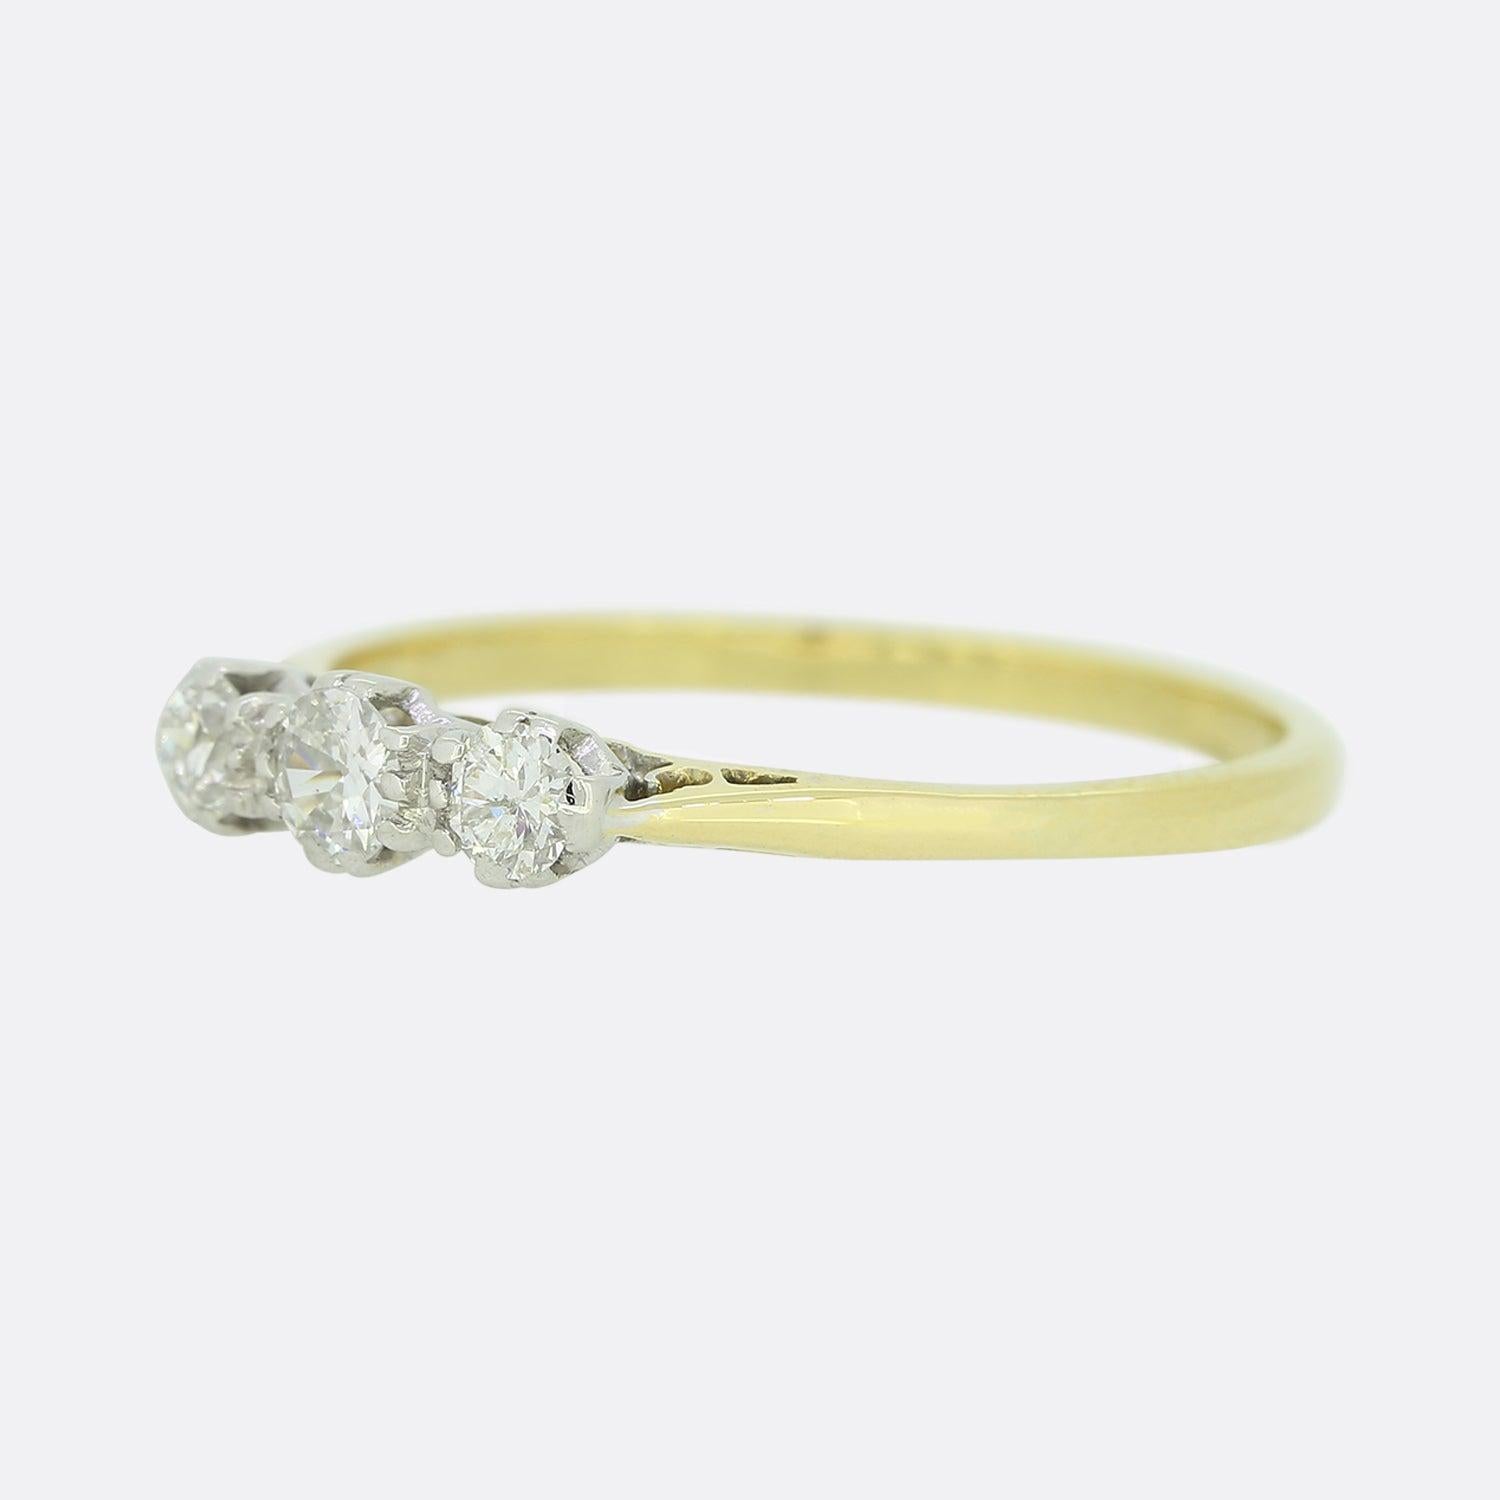 This is an 18ct yellow gold three-stone diamond ring. This vintage ring plays host to 3 round brilliant cut diamonds in a white gold setting to help bring out their sparkle.

Condition: Used (Very Good)
Weight: 2.0 grams
Size:P
Total Diamond Carat